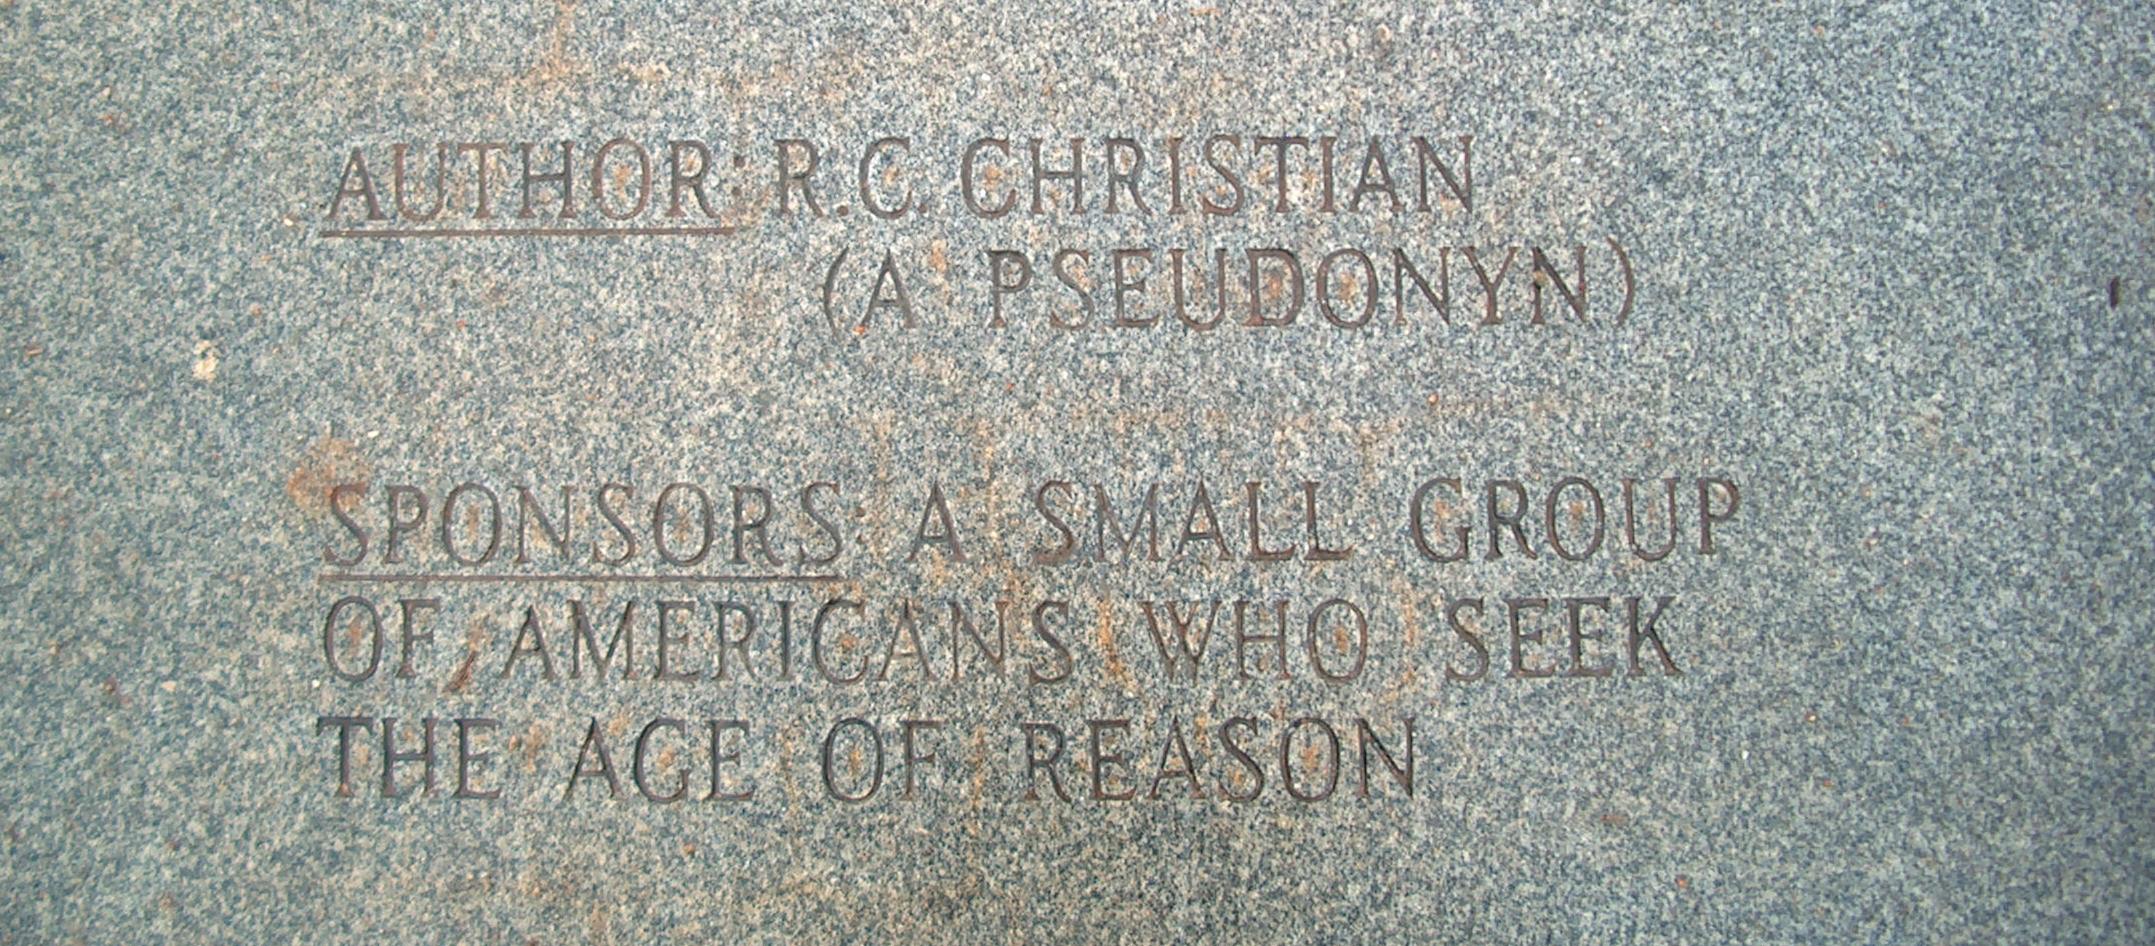 “Conspiracy Untarnished”, Decode of Georgia Guidestone’s NWO Anagram, Misspelled “R.C. Christian A Pseudonyn”